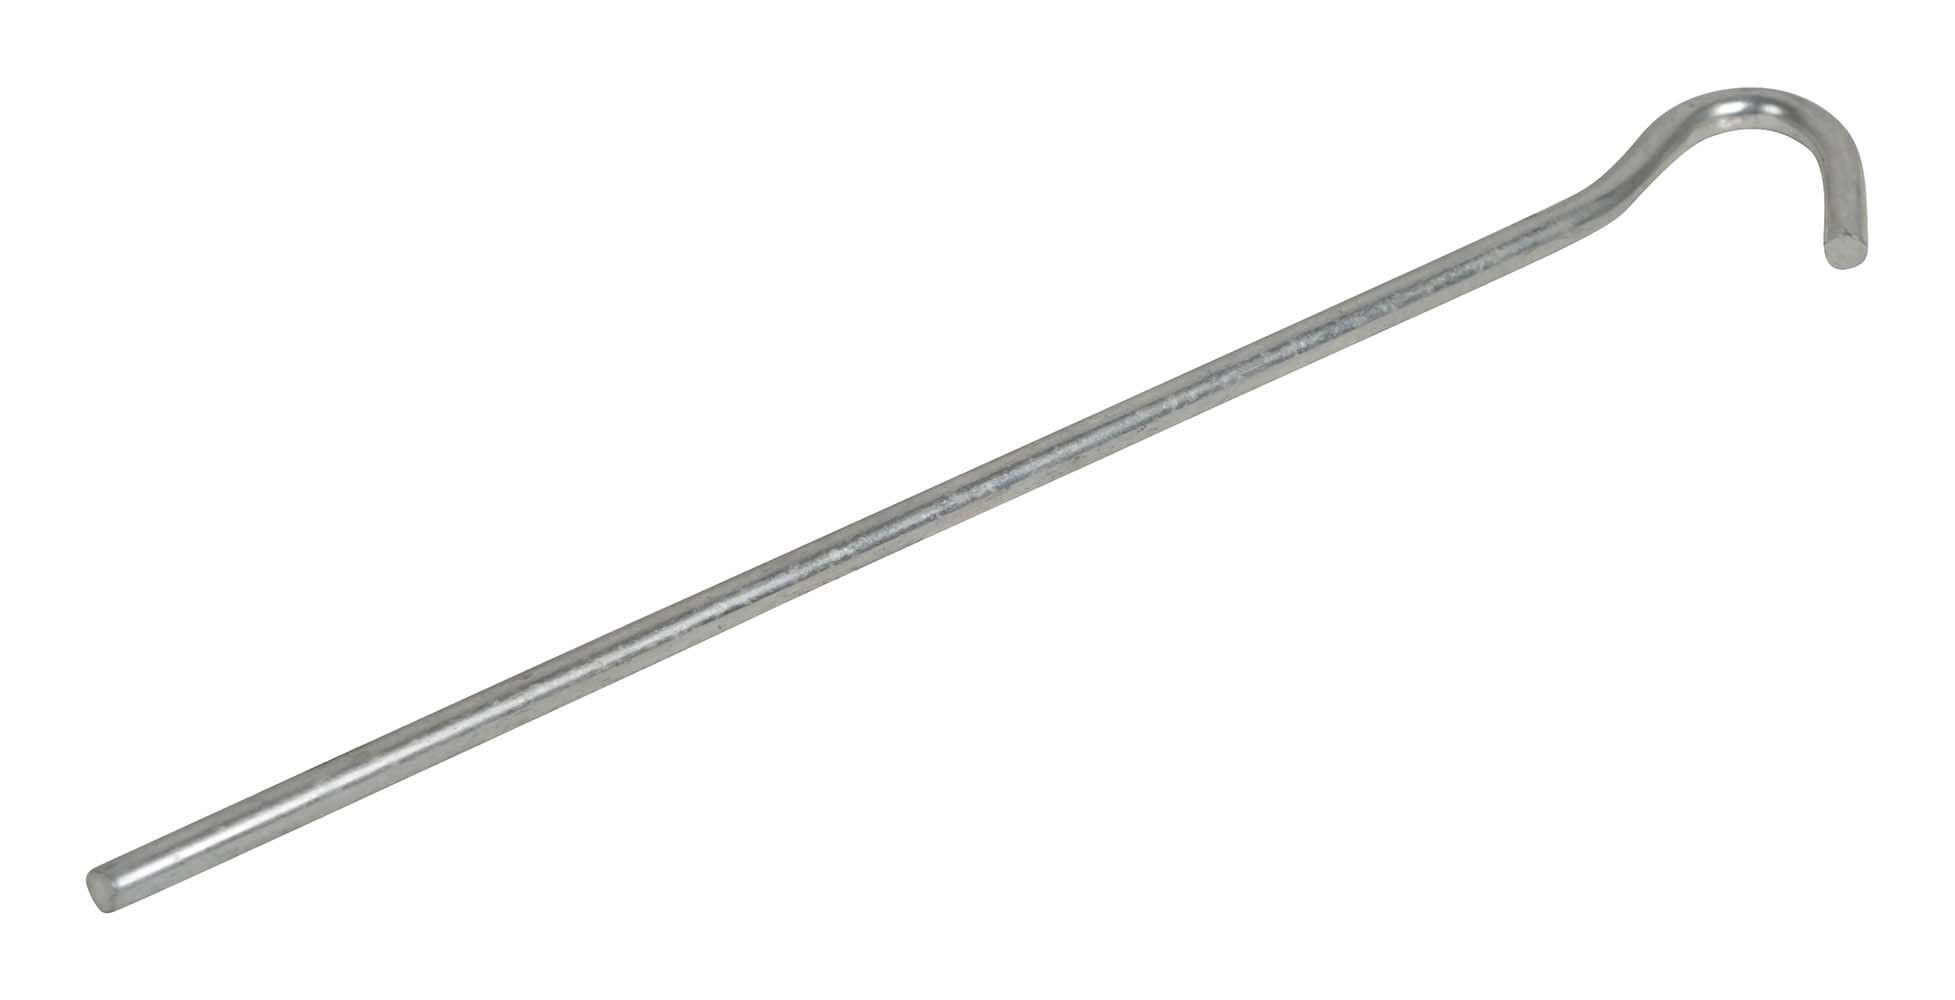 4114420 Tent peg with open eye.